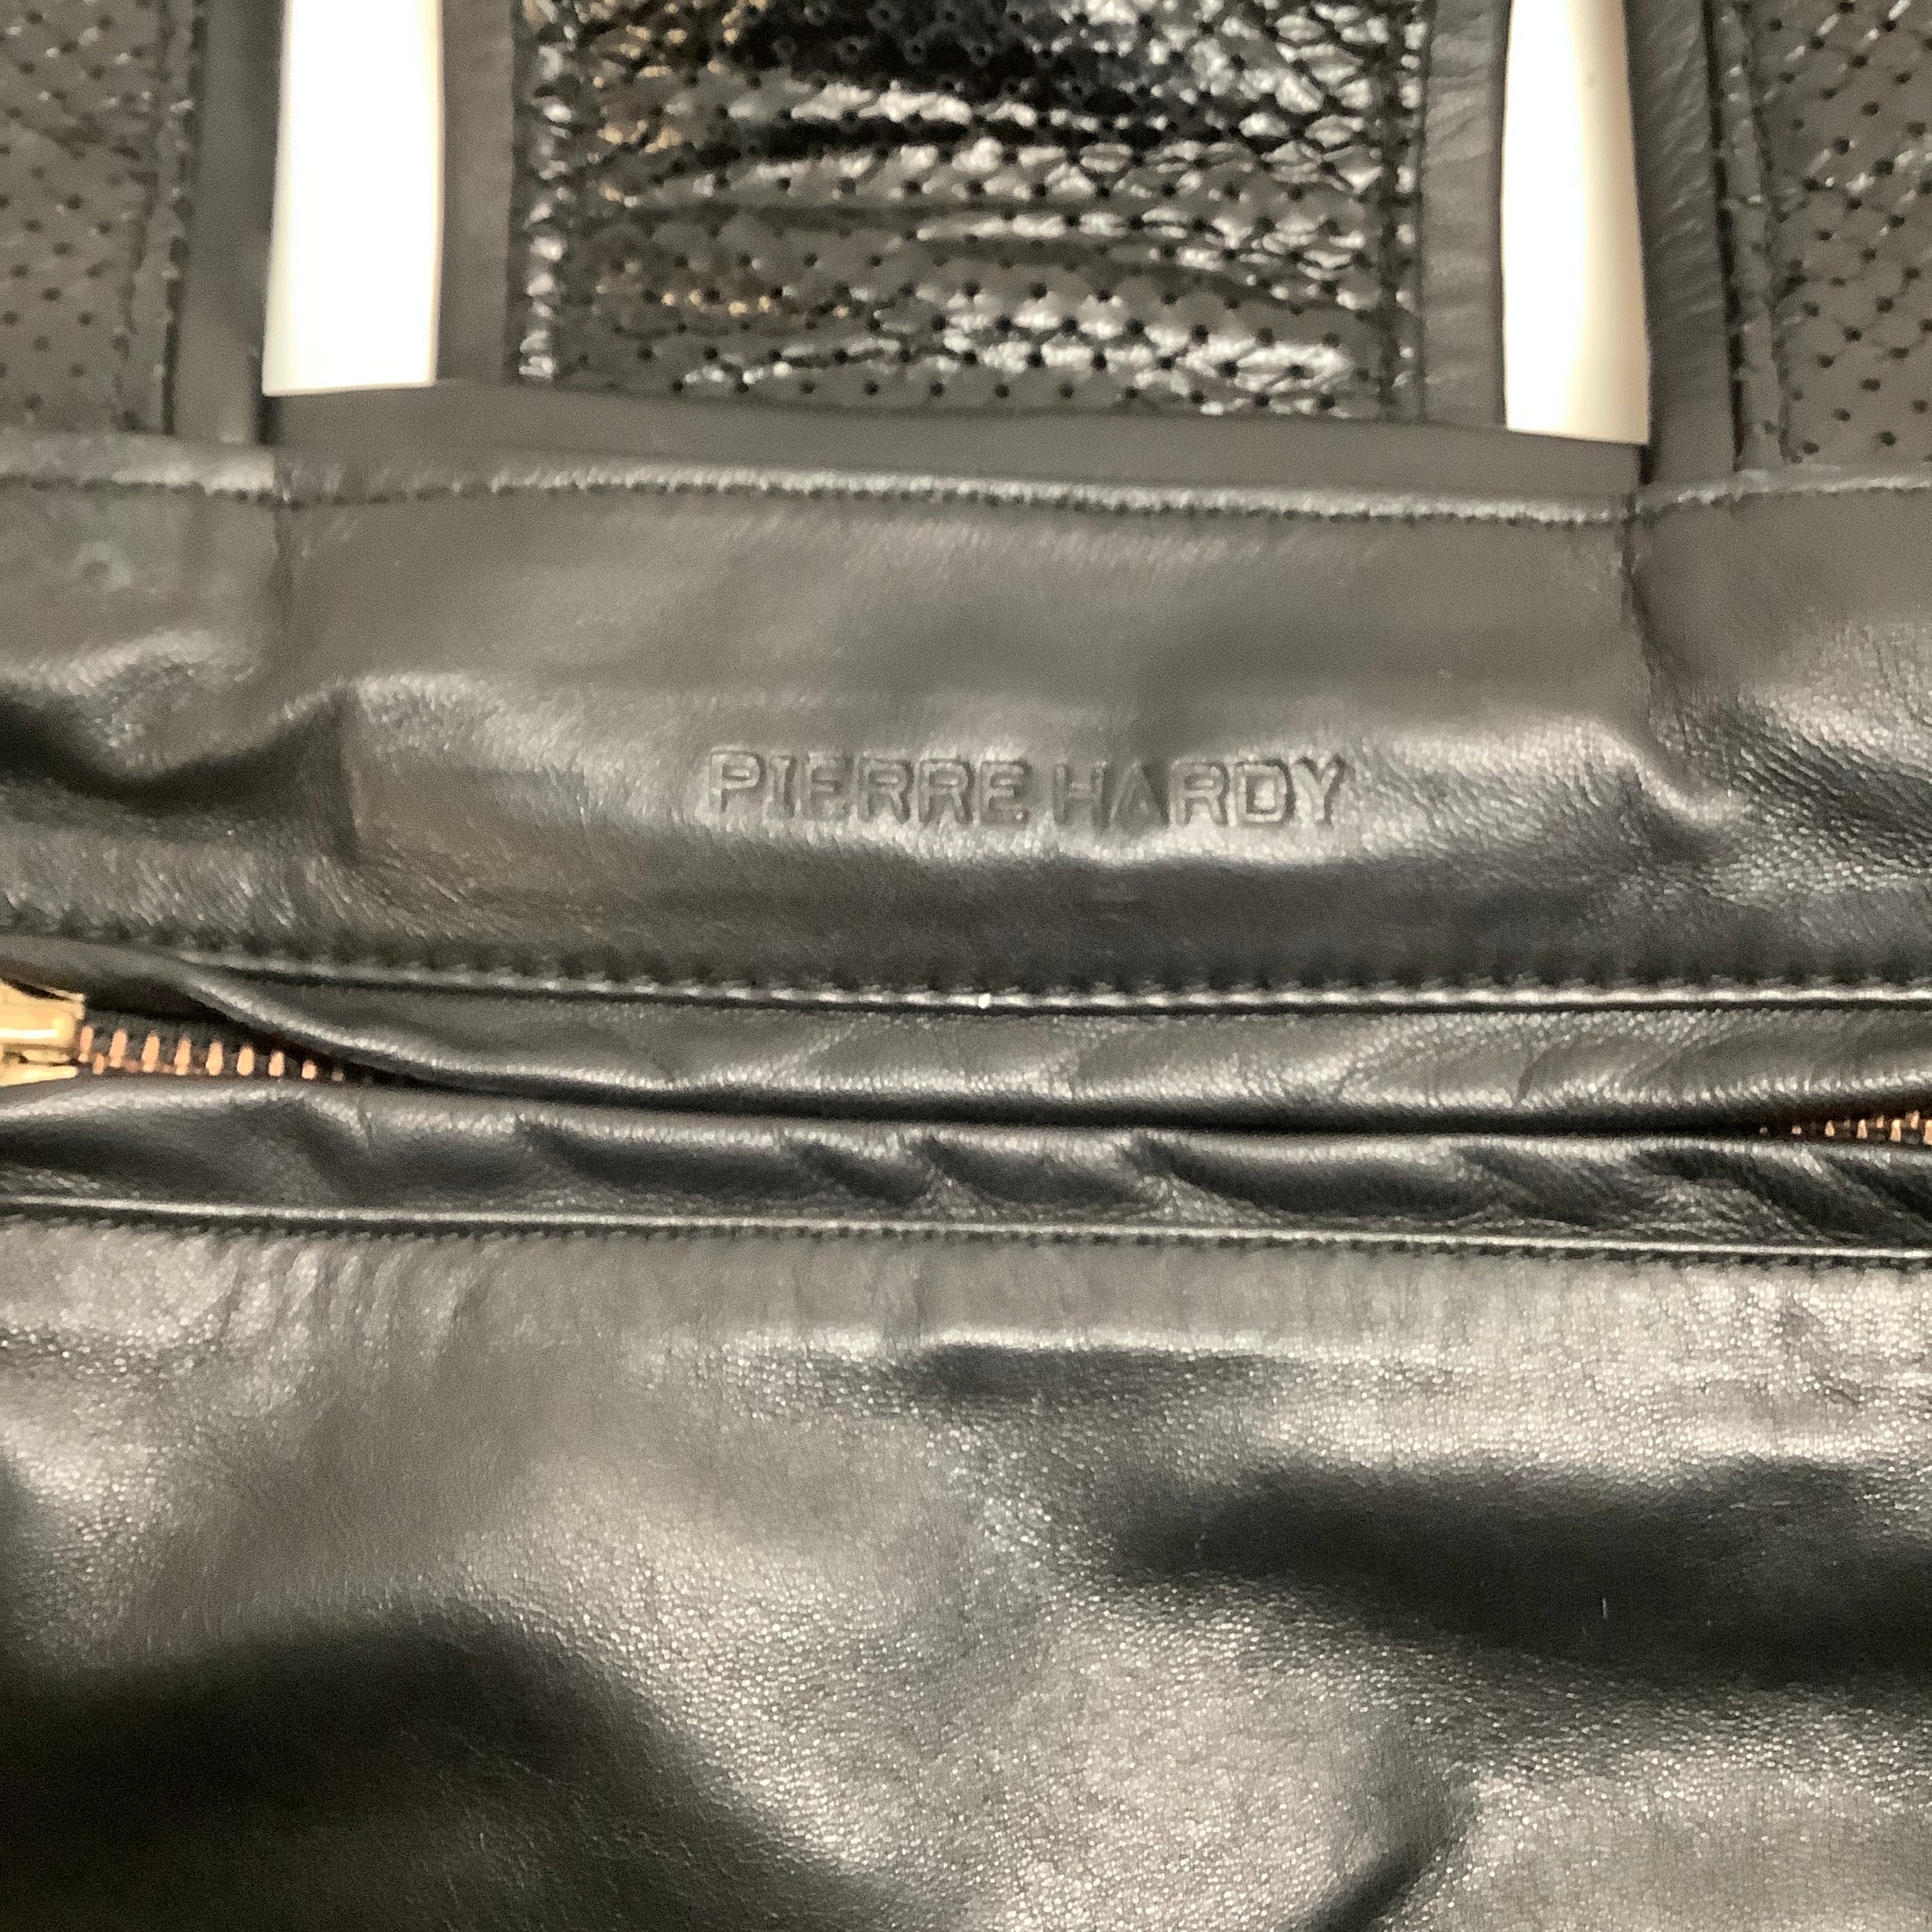 Pierre Hardy Black Perforated Leather Tote